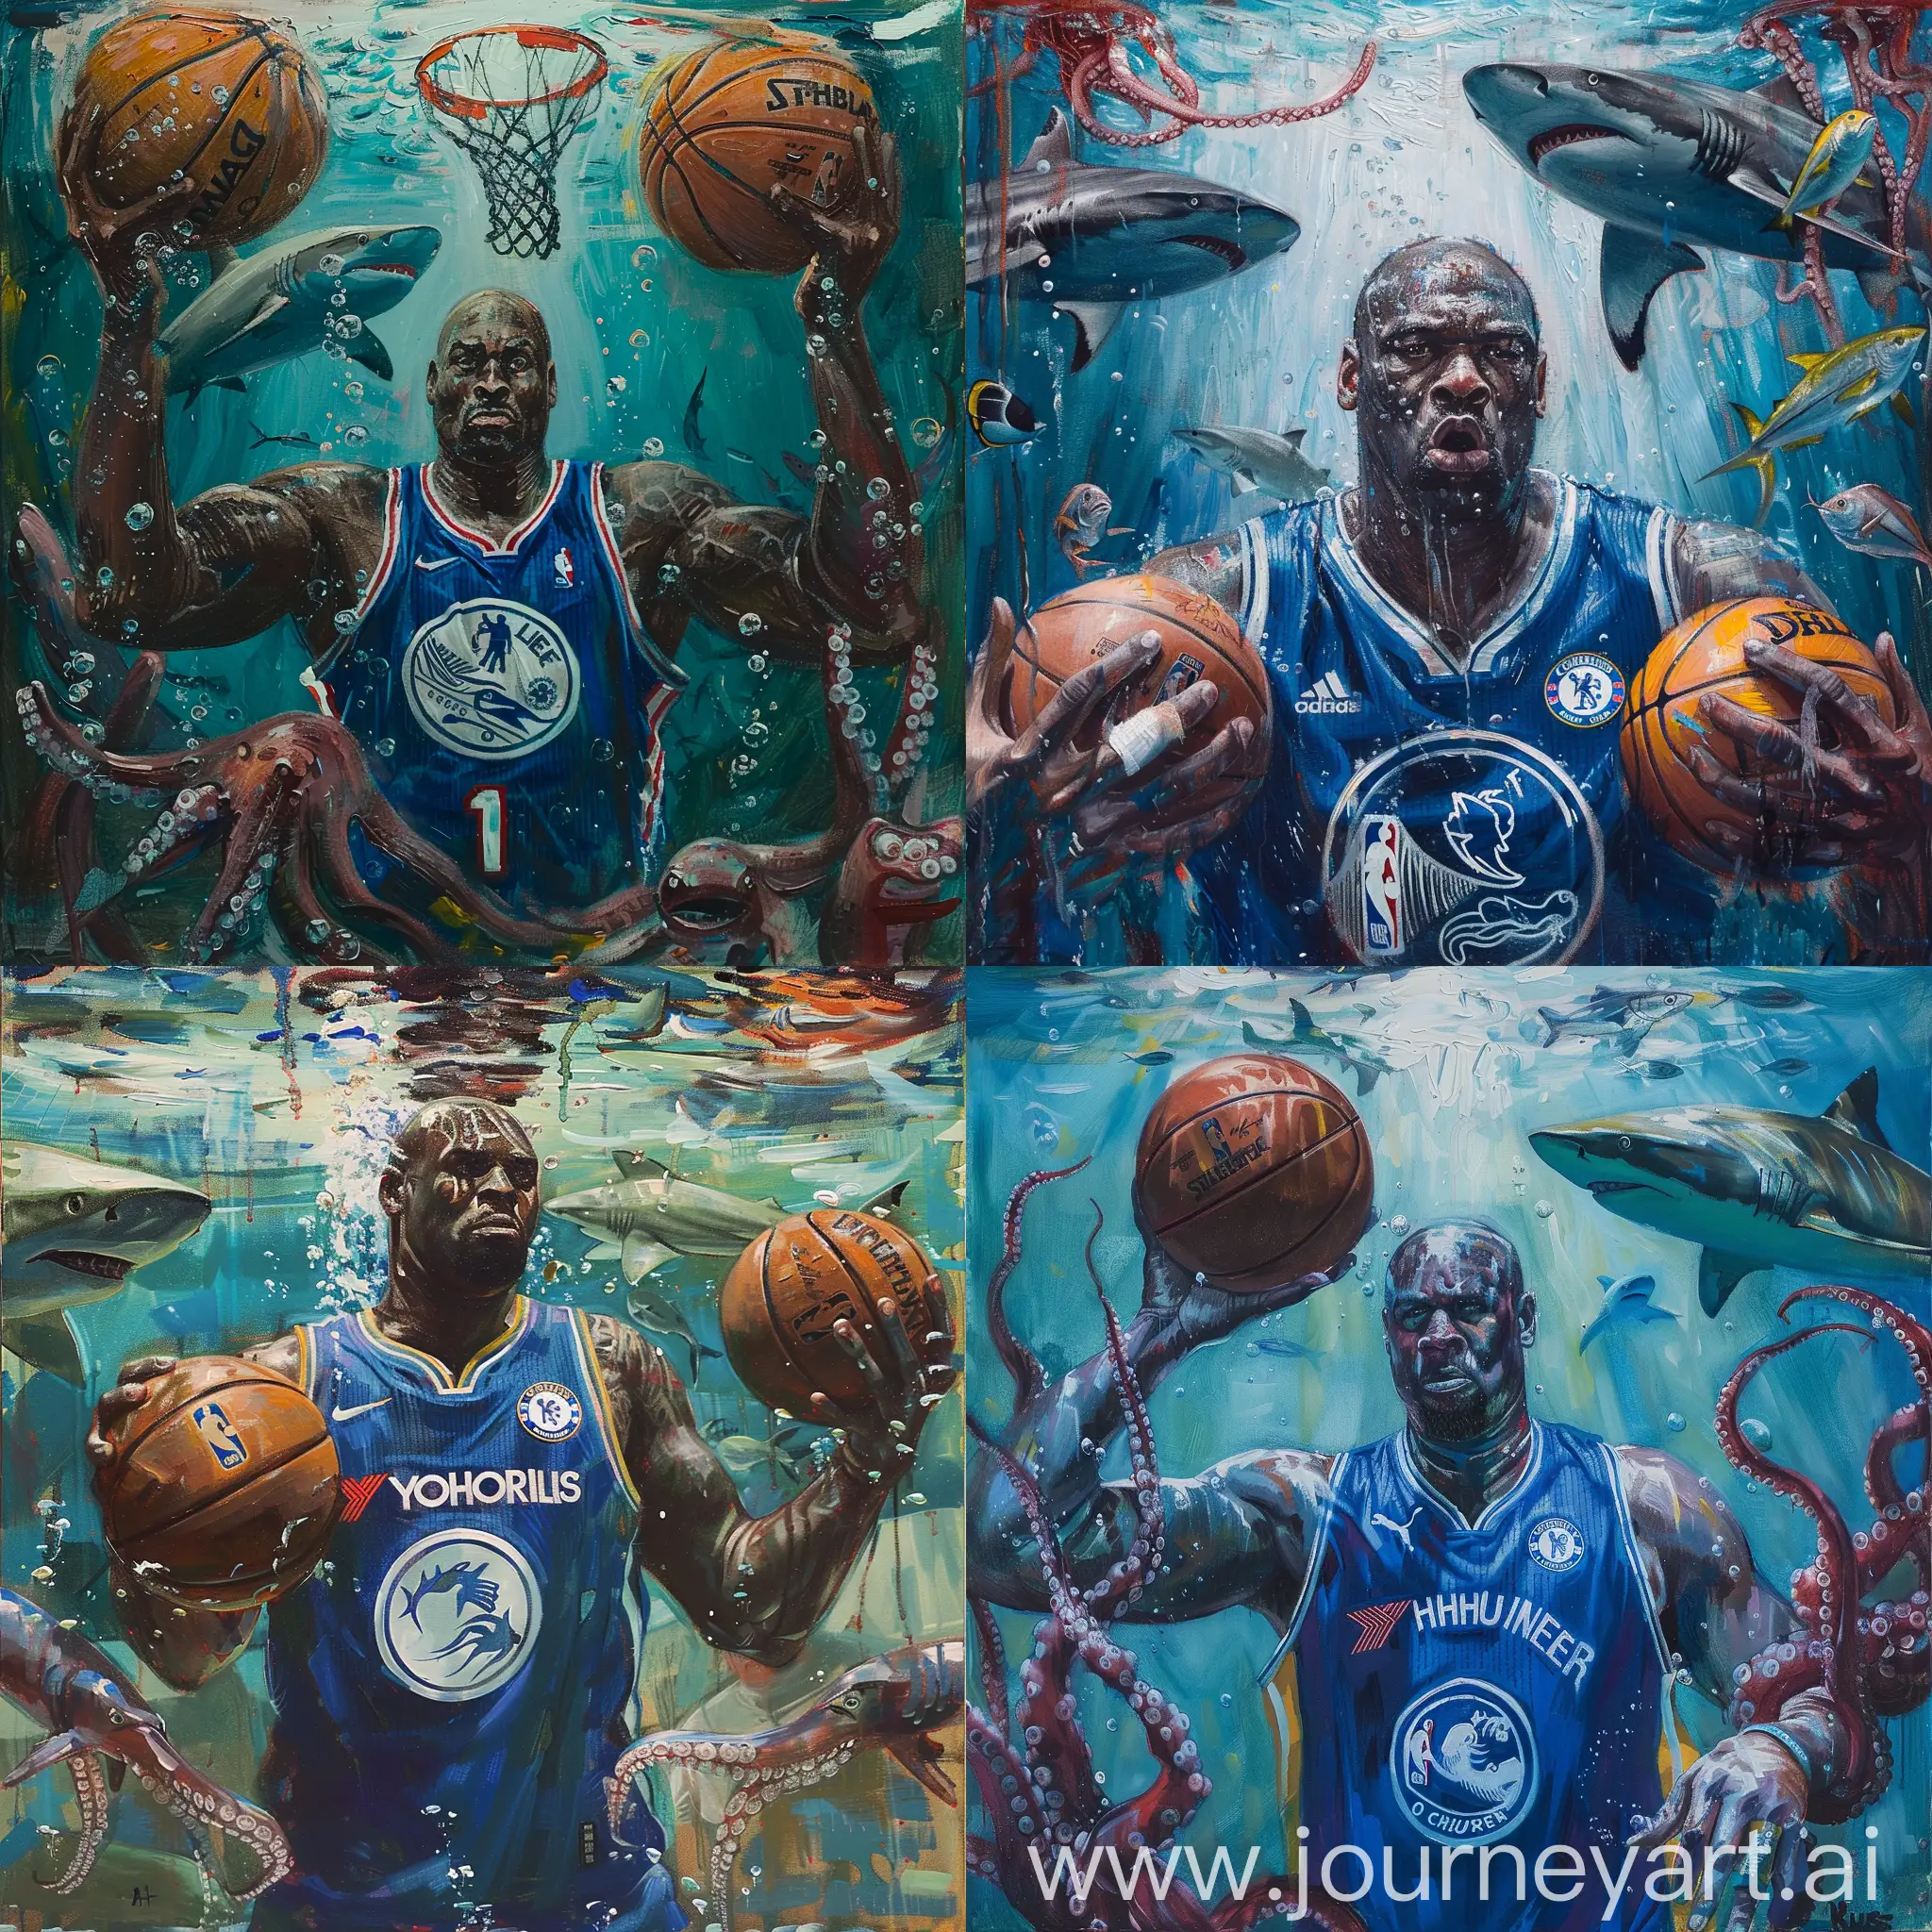 Make an impressionistic oil painting of Shaquille O'Neal underwater holding a basketball between both his hands. He is wearing a Chelsea football jersey. In the background there should be squids, sharks and fish